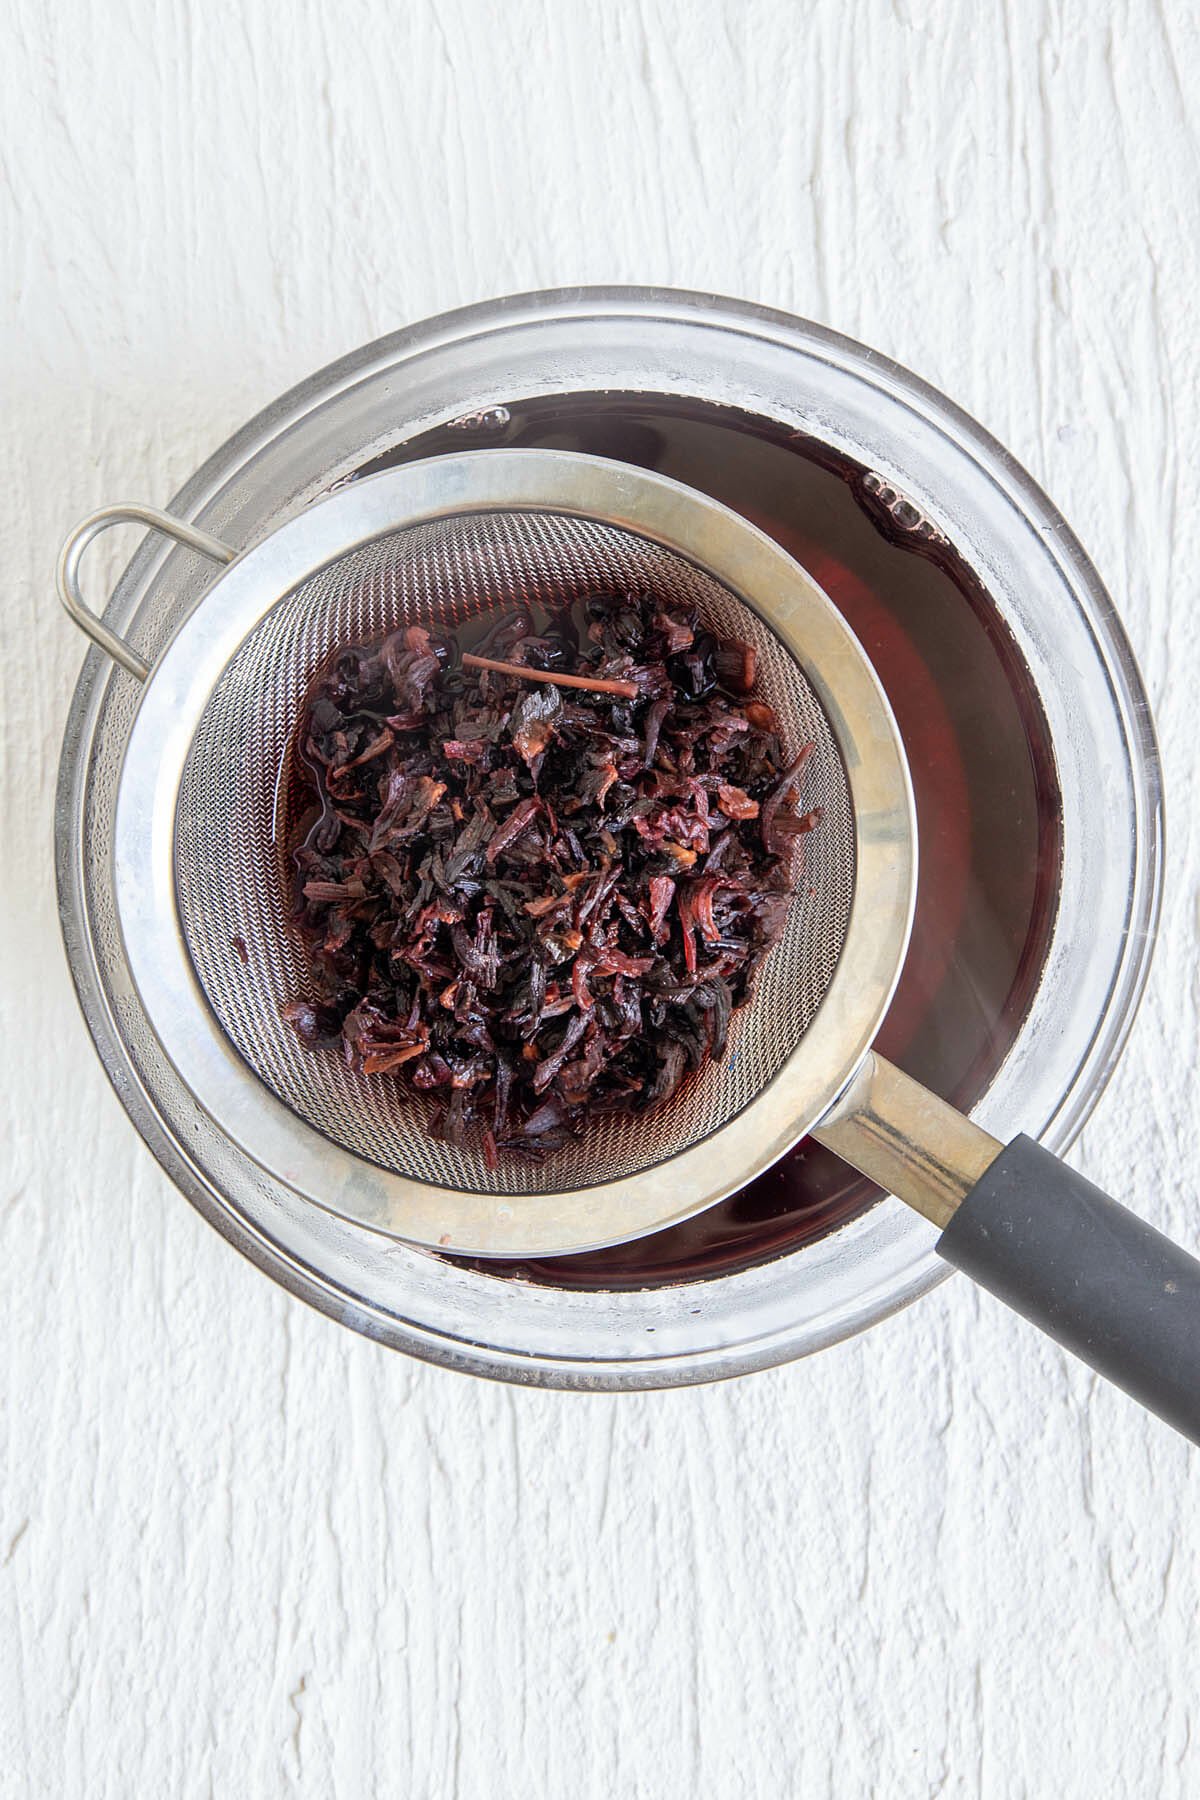 Hibiscus flowers being strained out of tea.